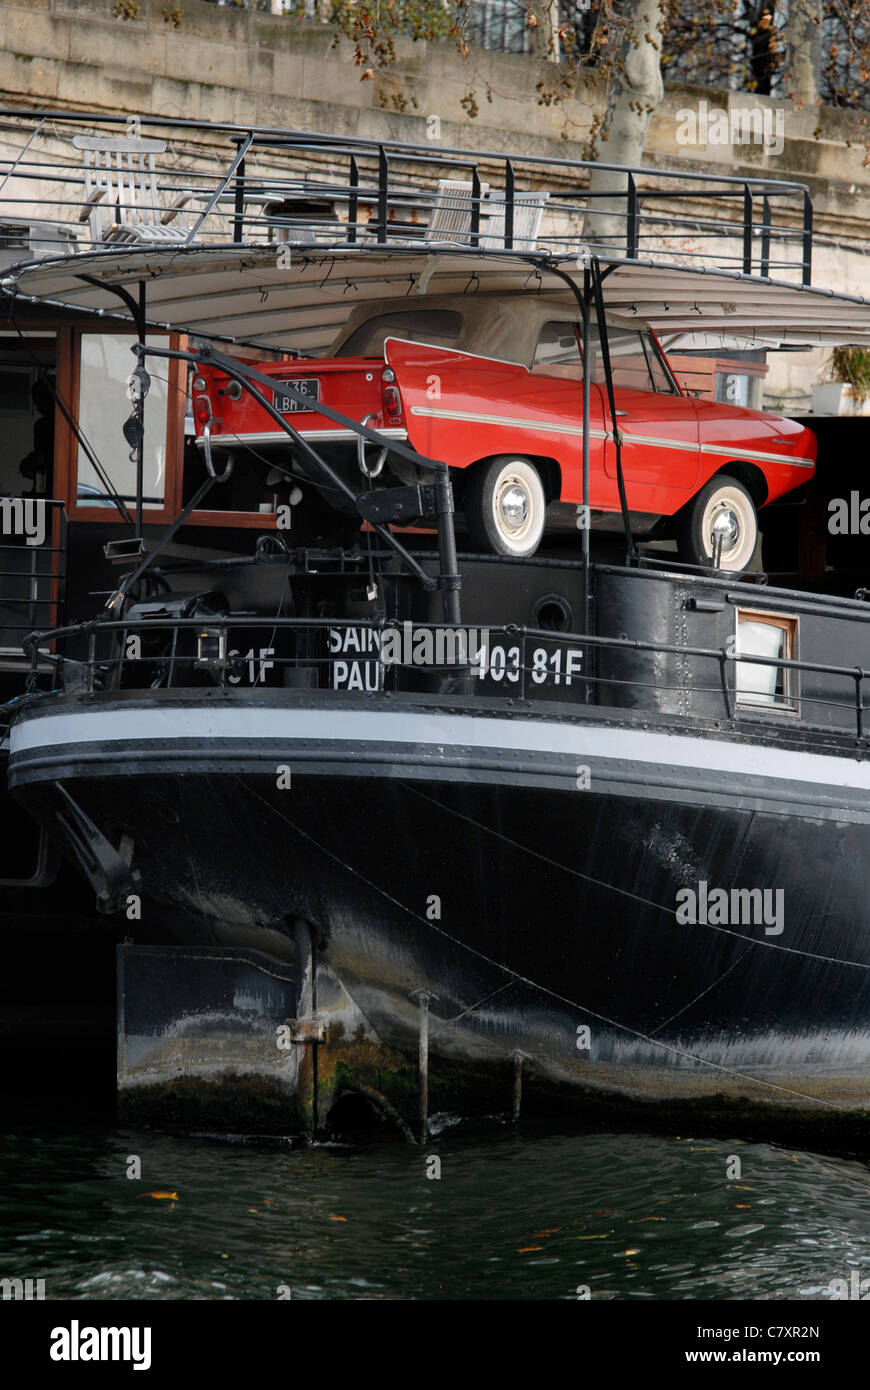 An Amphicar amphibious car on the back of a houseboat on the River Seine, Paris. Stock Photo